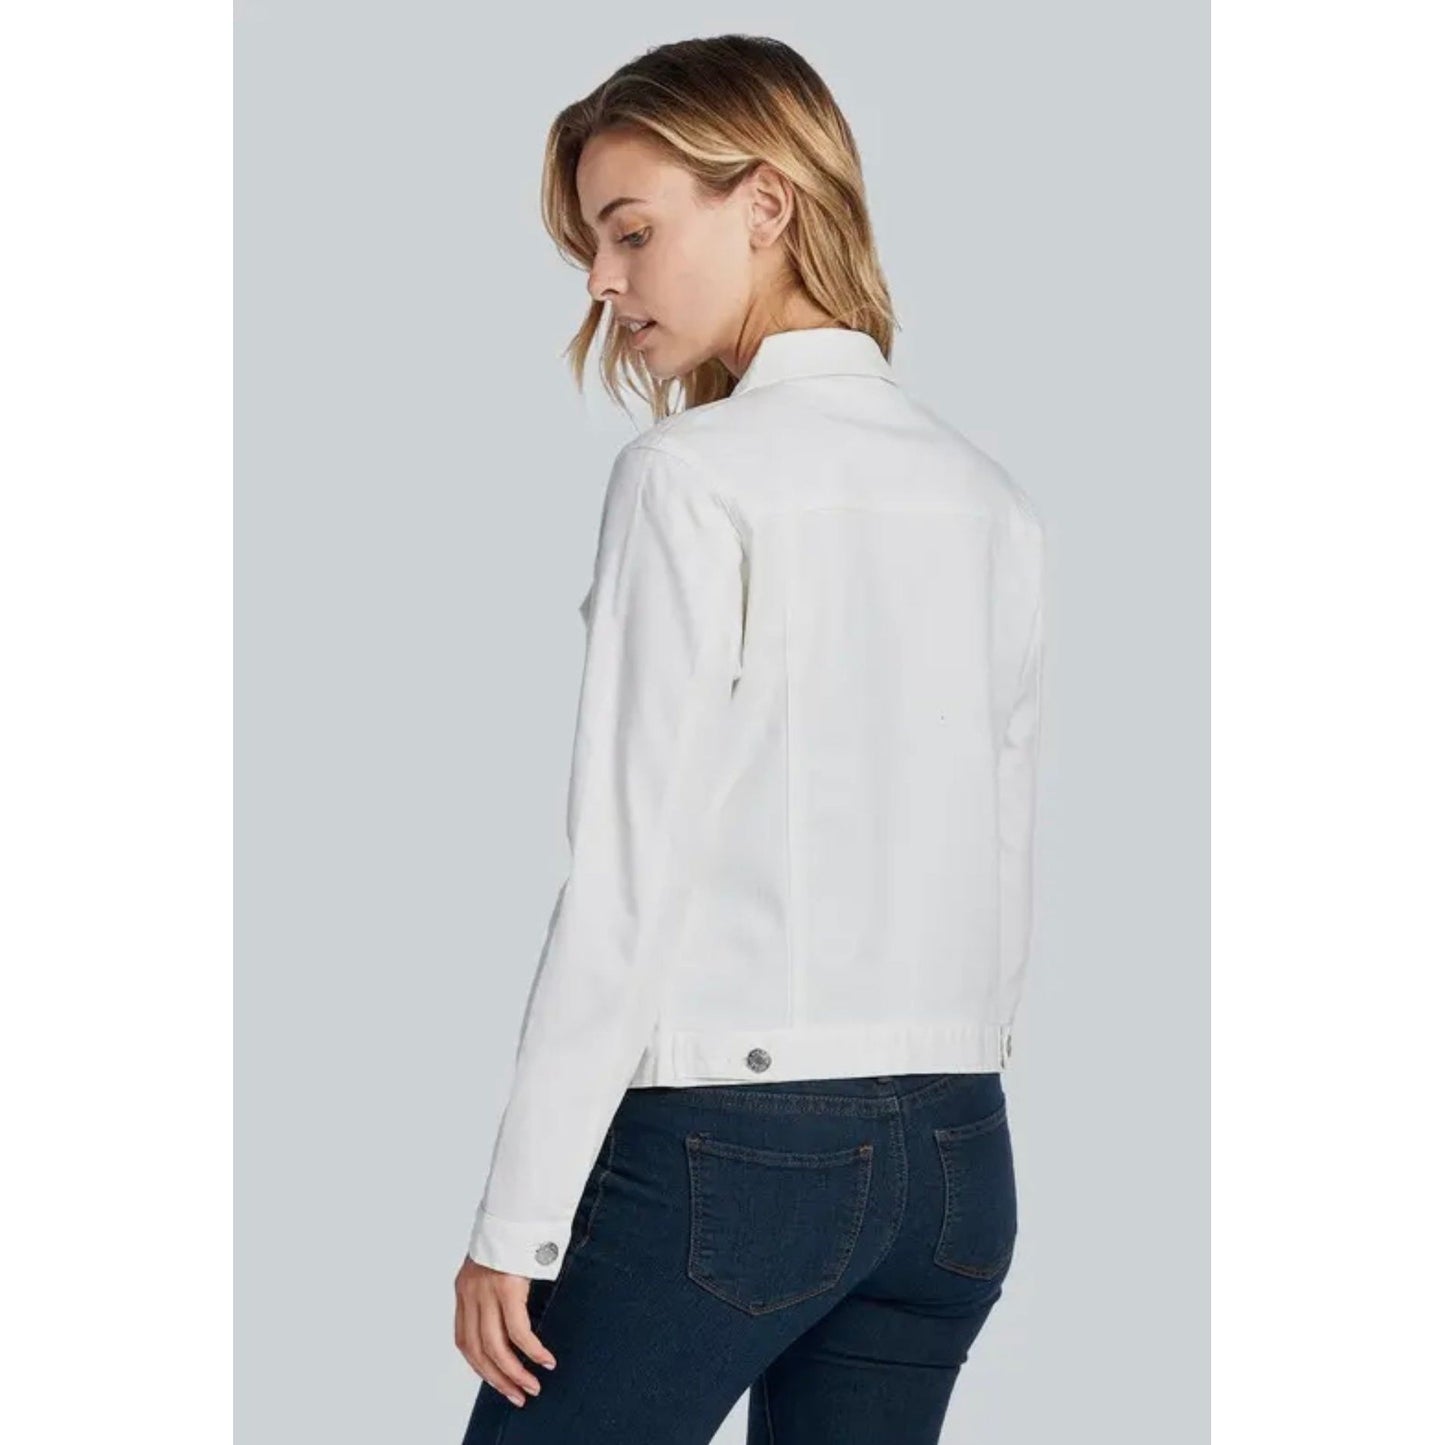 Women's White Denim Jacket: Perfect for Casual Days and Office Chic